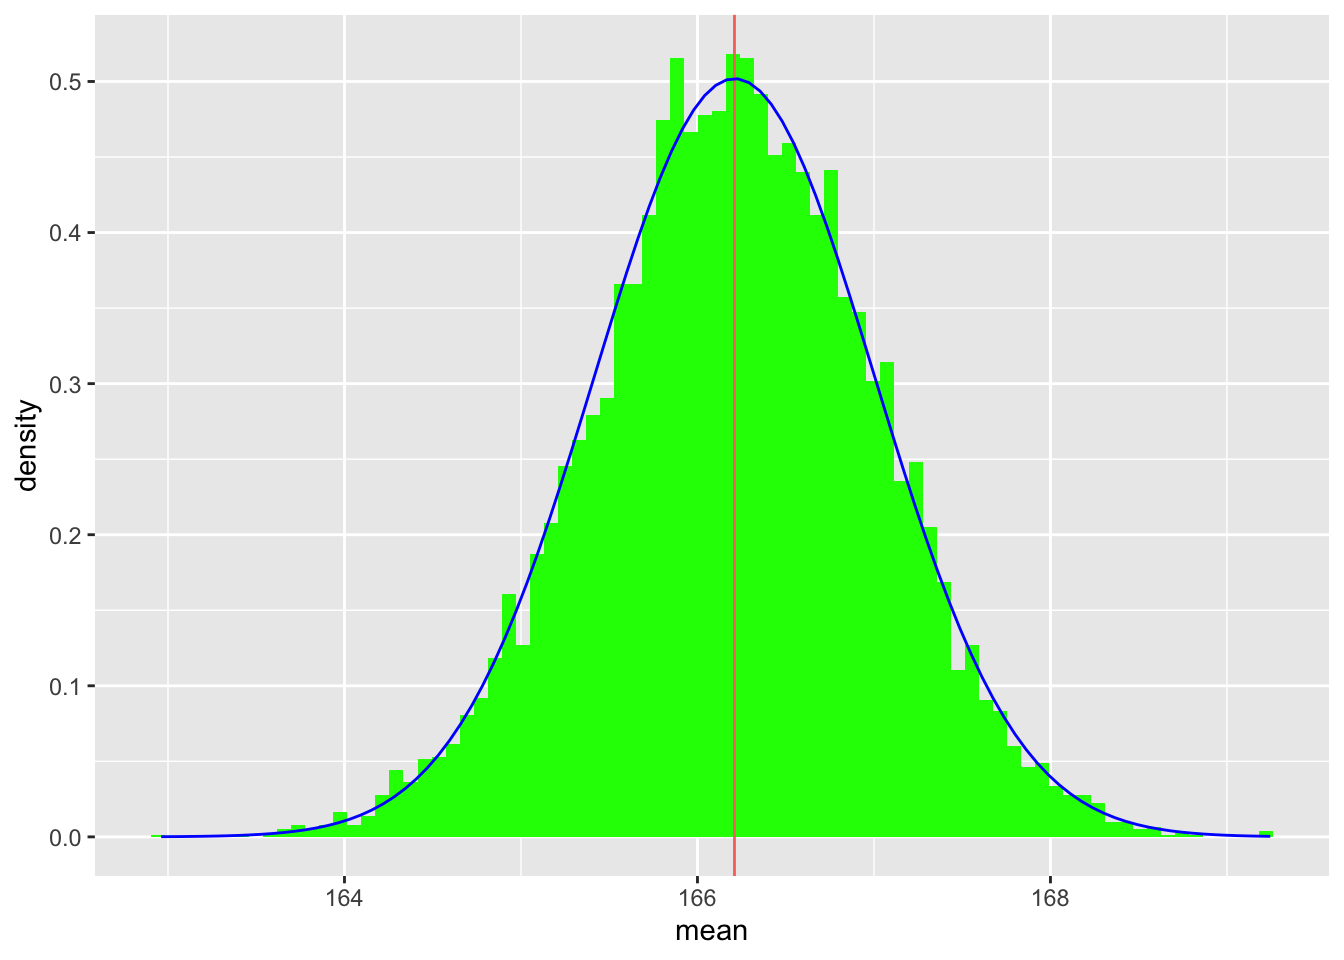 Histogram for means of samples of 100 from the bimodal distribution showing an approximately normal distribution centred around 166.2 centimetres.